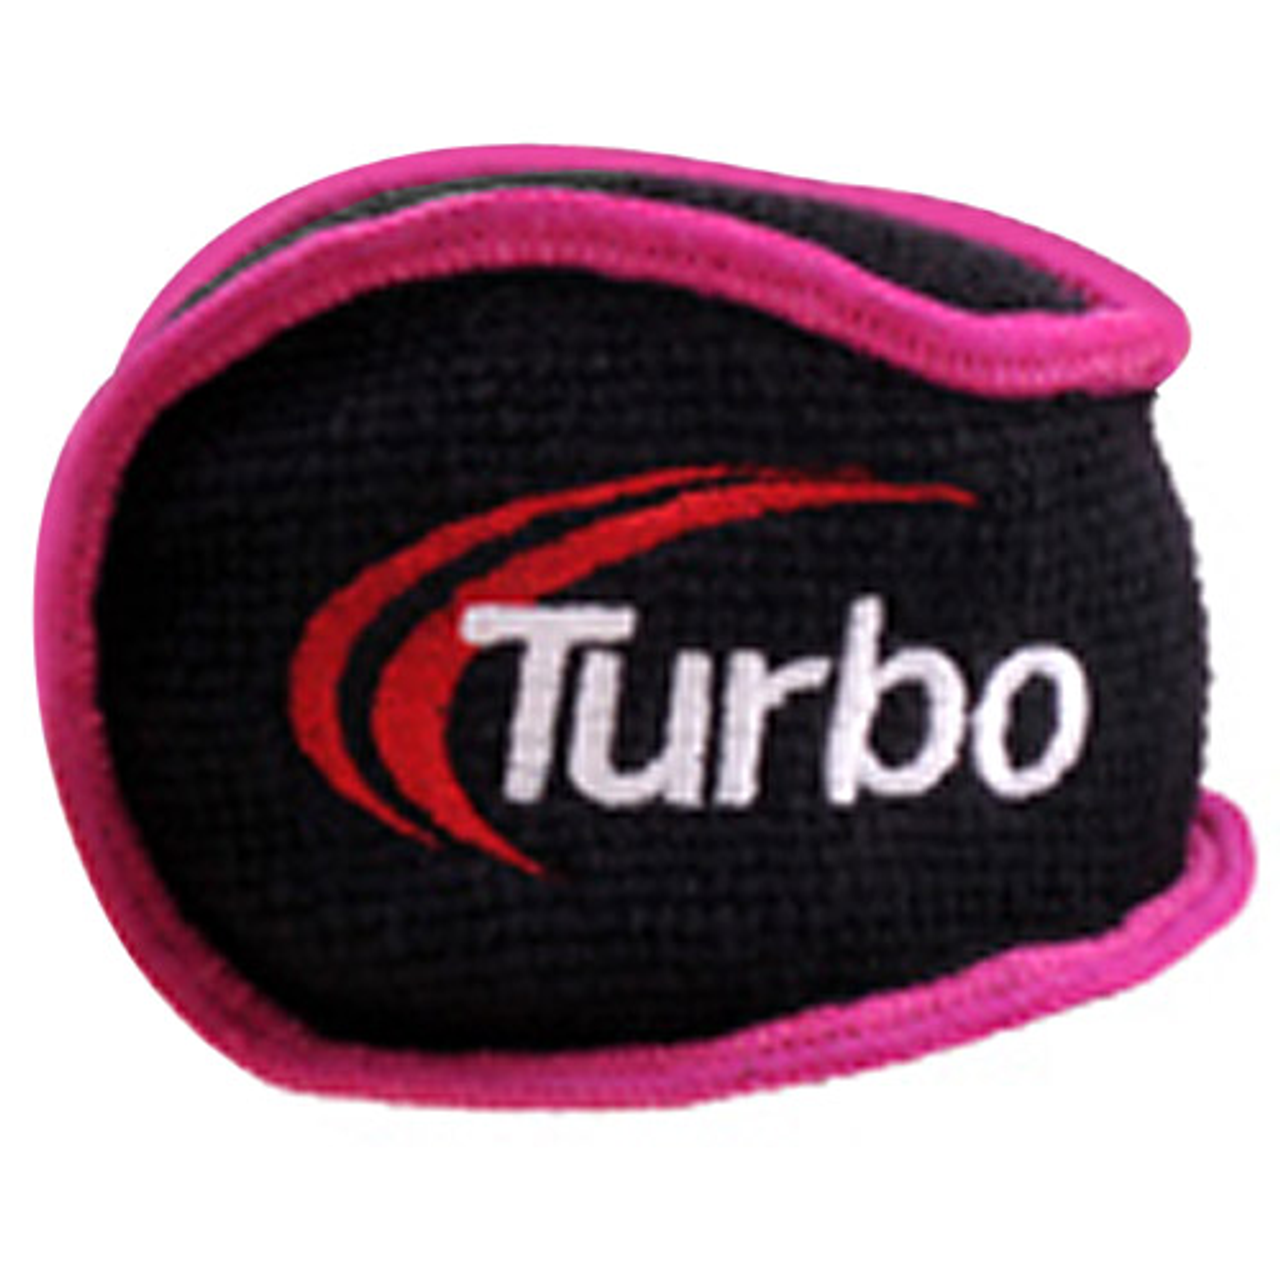 Turbo Grip Smart Microfiber Puff Ball Grip Sack Pink Questions & Answers